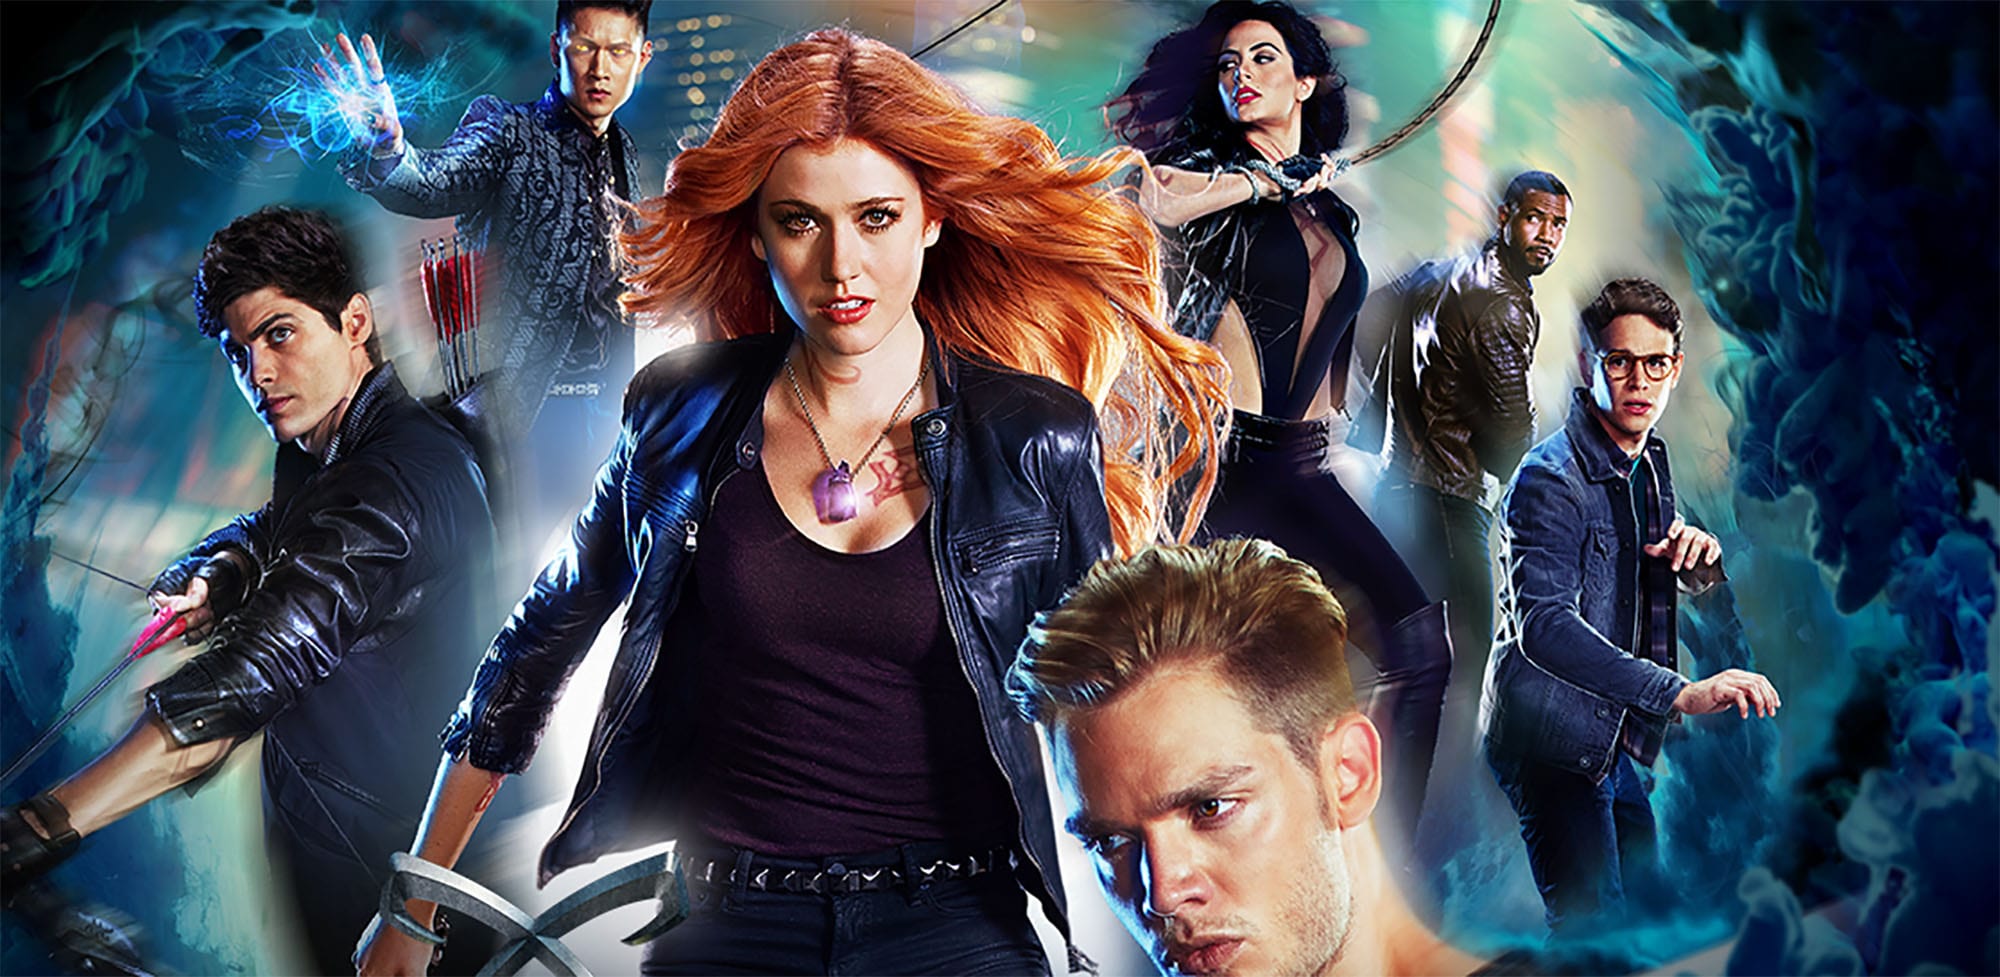 'Shadowhunters' will always have a place in our hearts. Revisit the show's diverse cast and iconic moments.